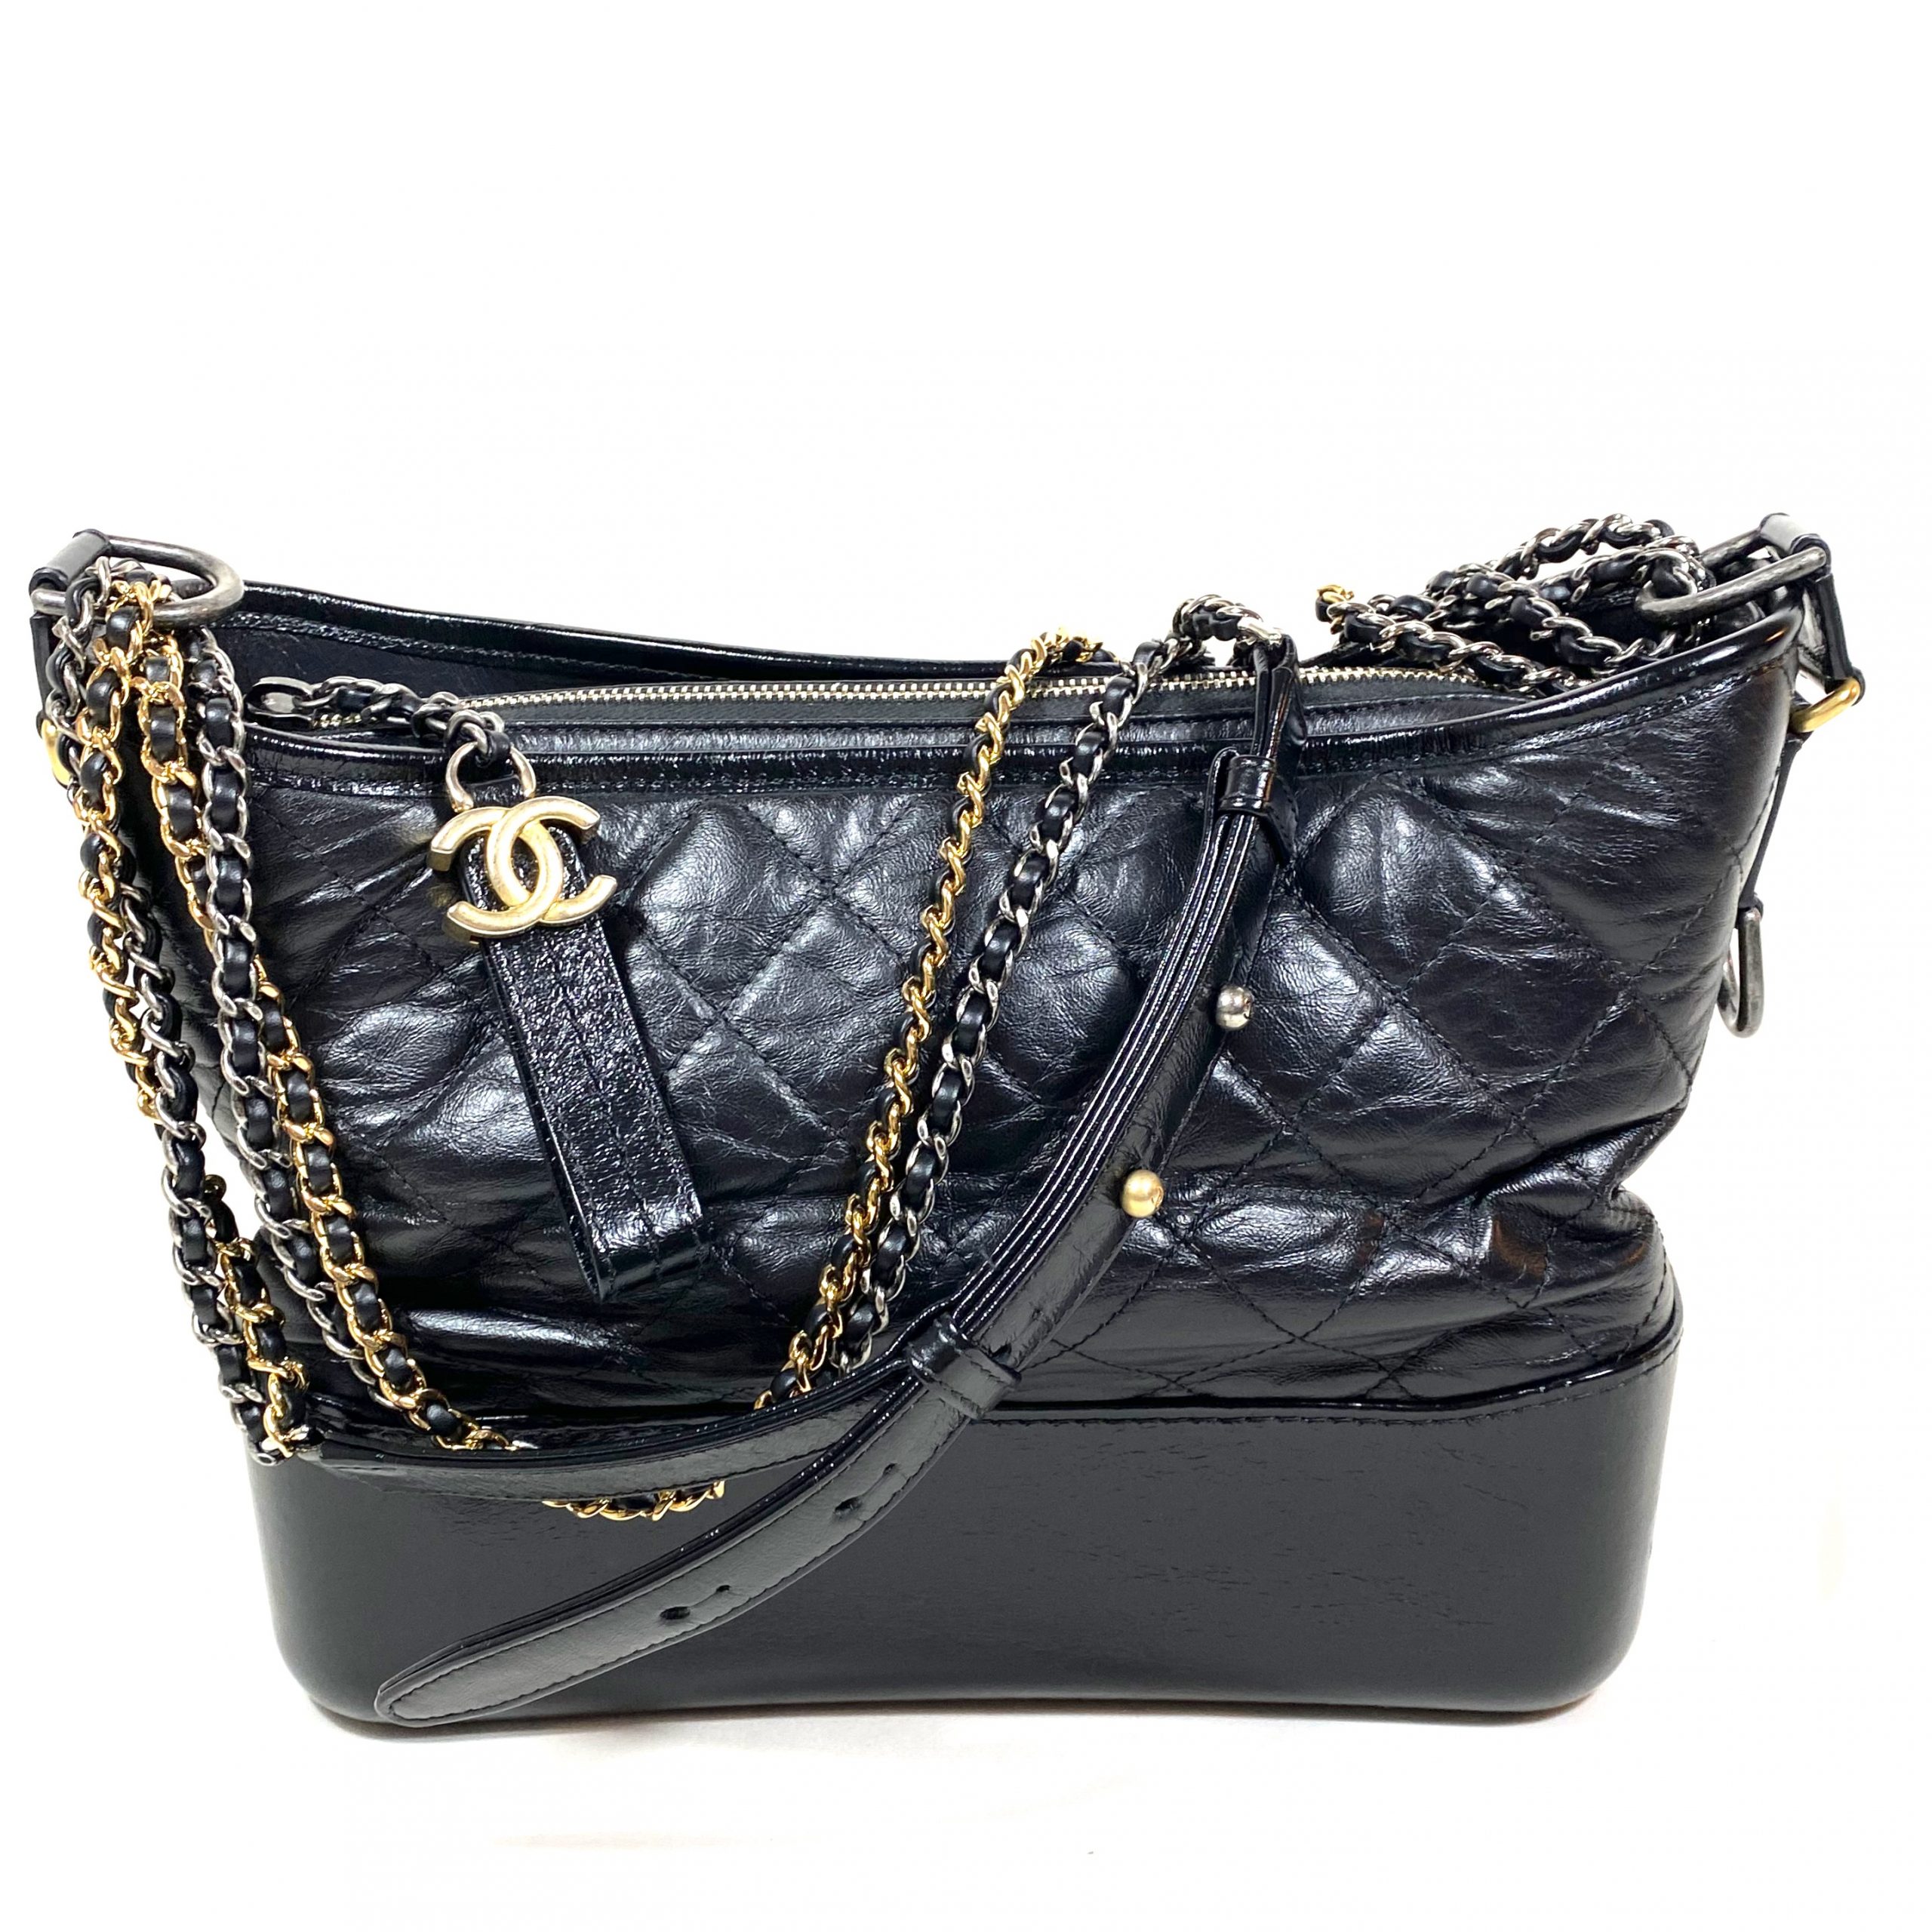 CHANEL GABRIELLE HOBO BAG IN BLACK QUILTED AGED LEATHER - Still in fashion